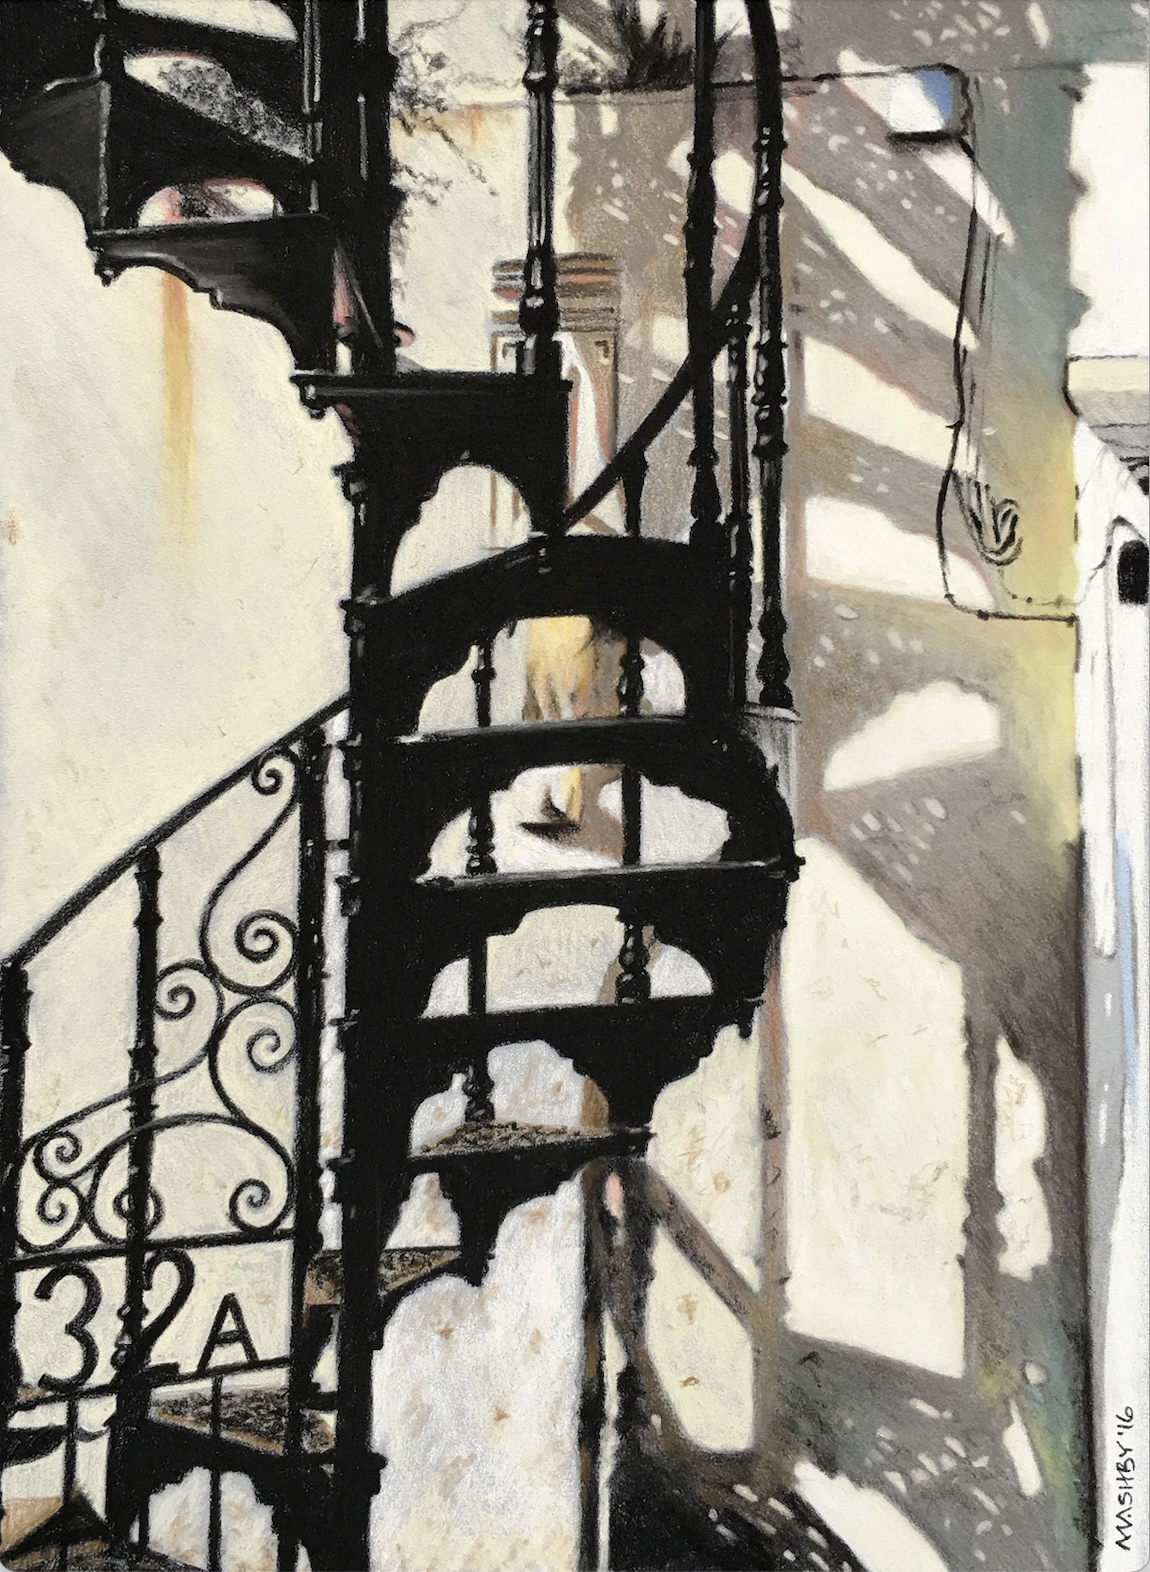 paintings of spiral staircases-Michele Ashby, "32A," pastel, 29 x 21 cm